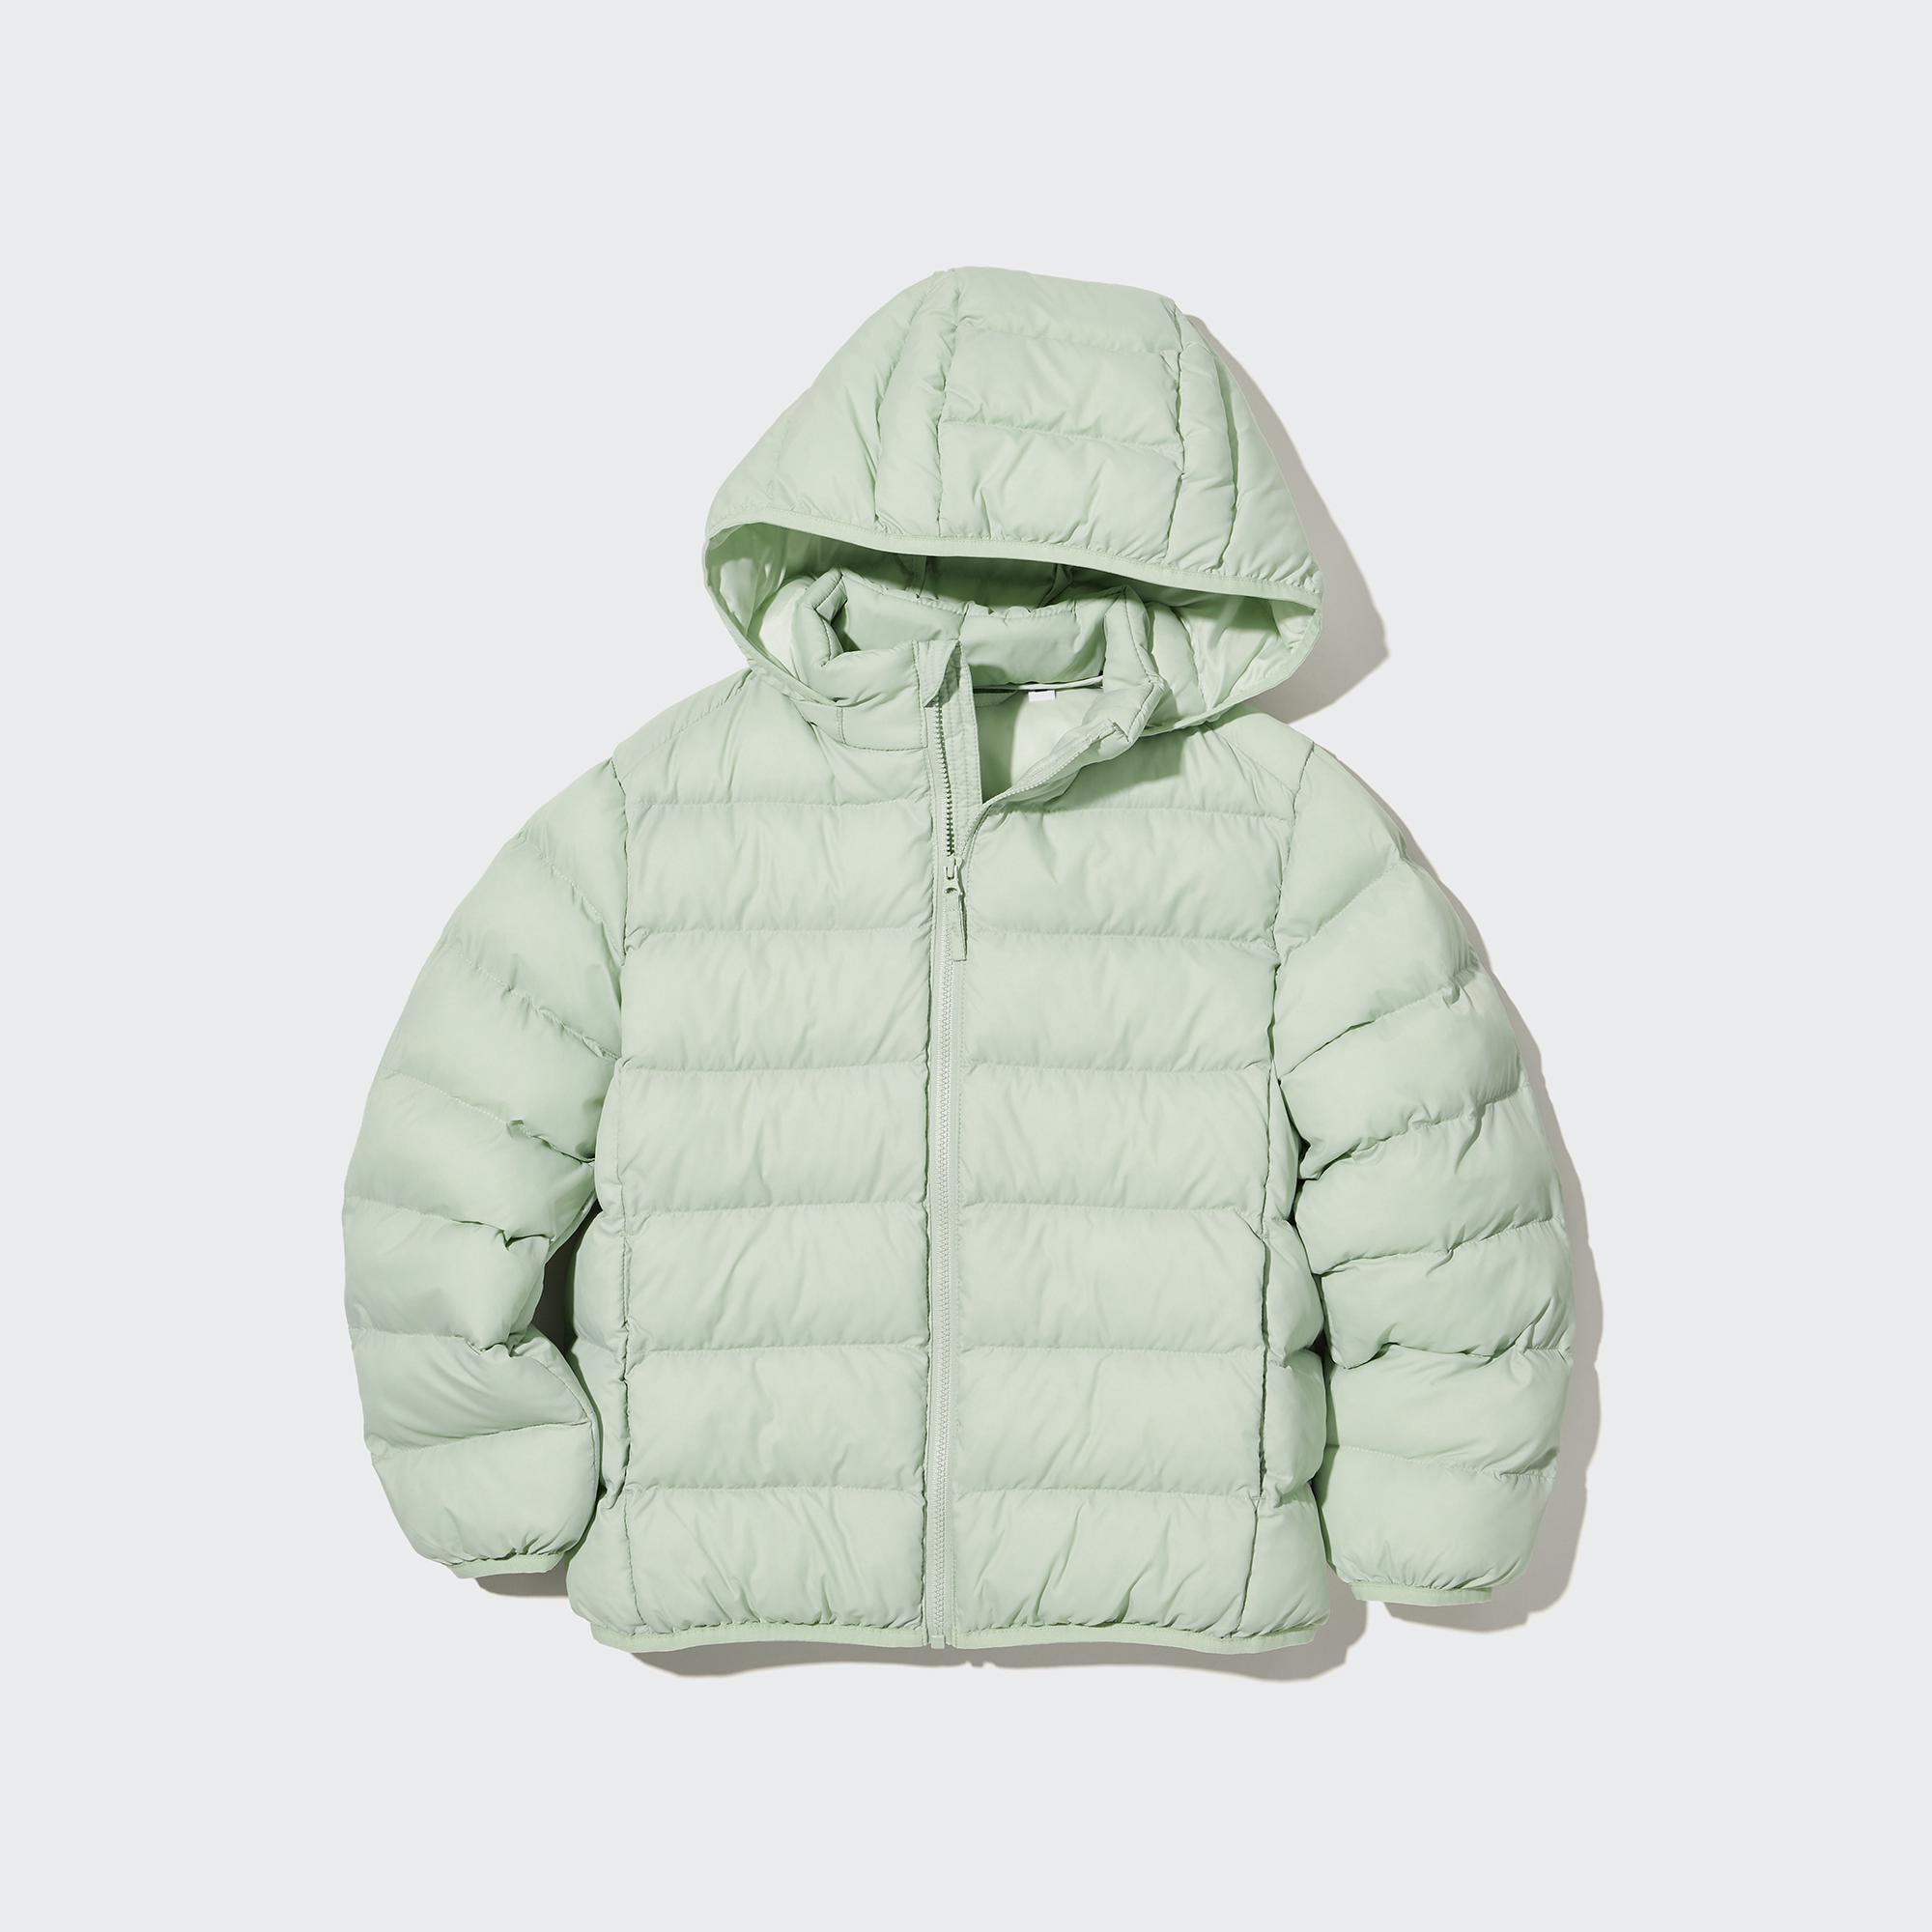 PUFFTECH WASHABLE PARKA (WARM PADDED)